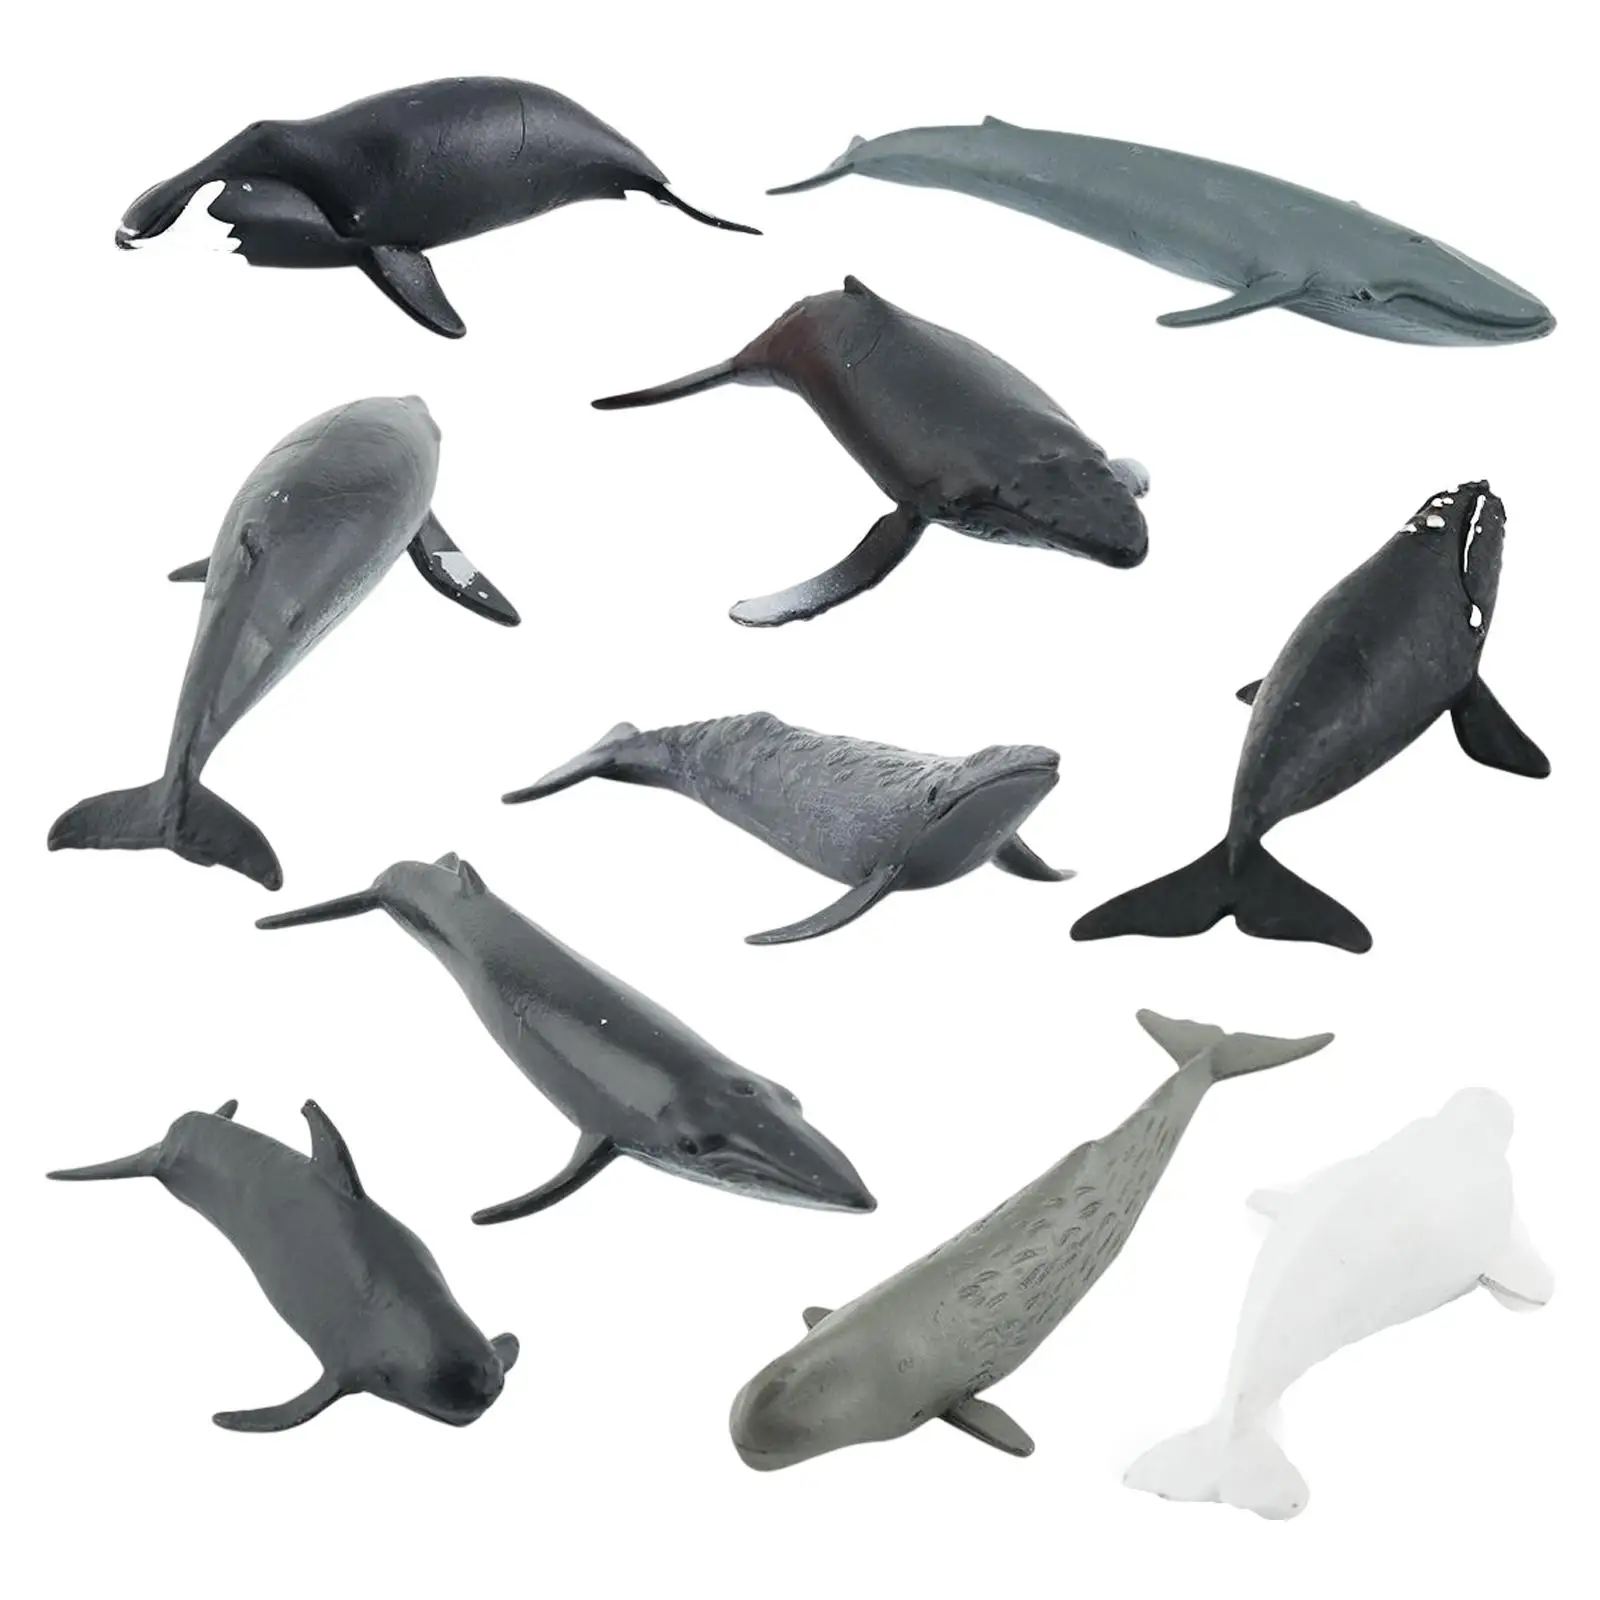 10 Pieces Simulation Lifelike Shark Miniature for Party Favors Classroom Prop Kids Toy